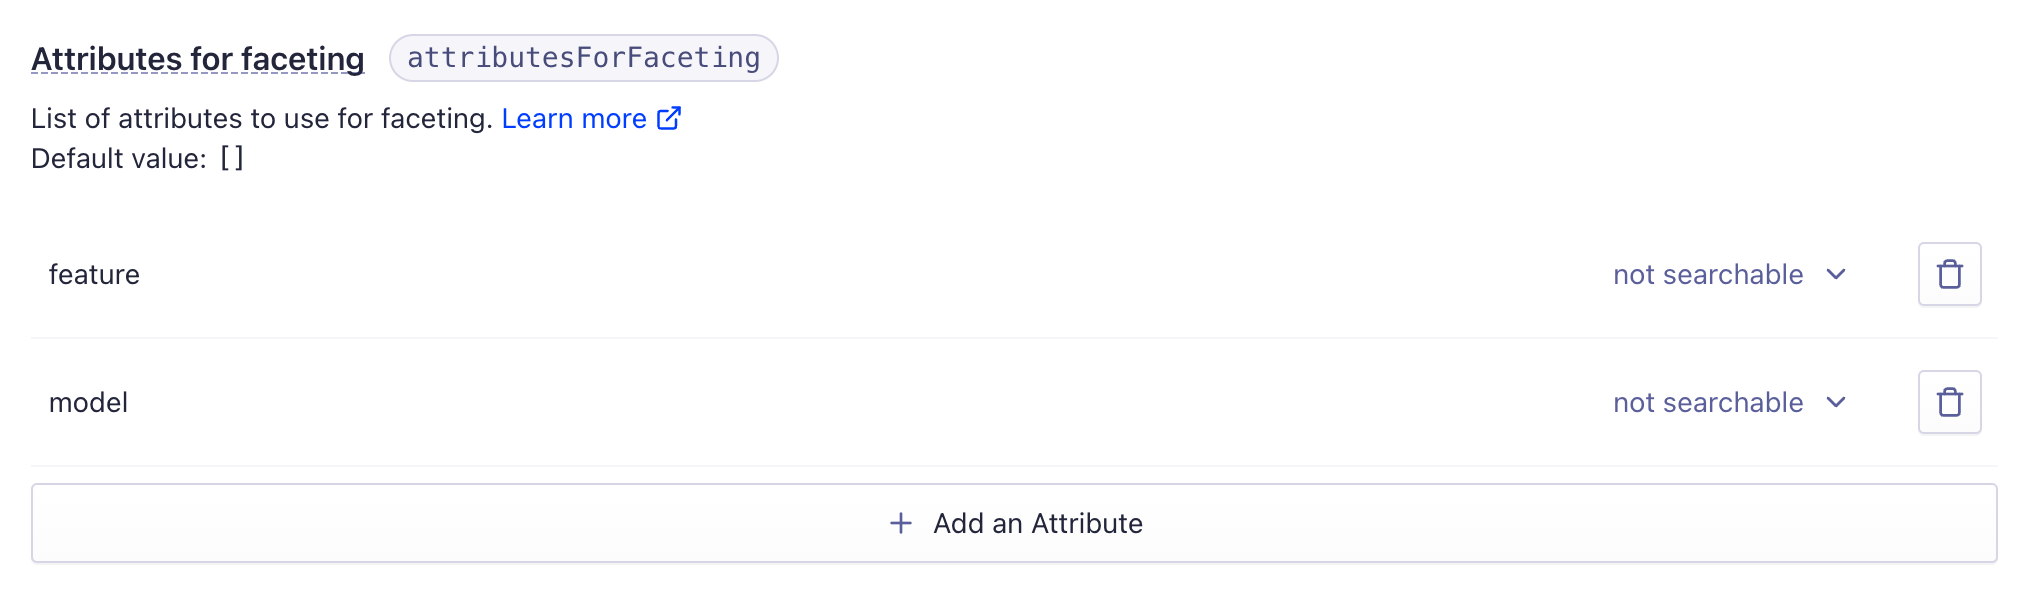 Attributes for faceting section in Algolia. It lists the facets that have been set up in the index. For the index shown, a feature facet and a model facet have been added. There is an Add an attribute button at the bottom.